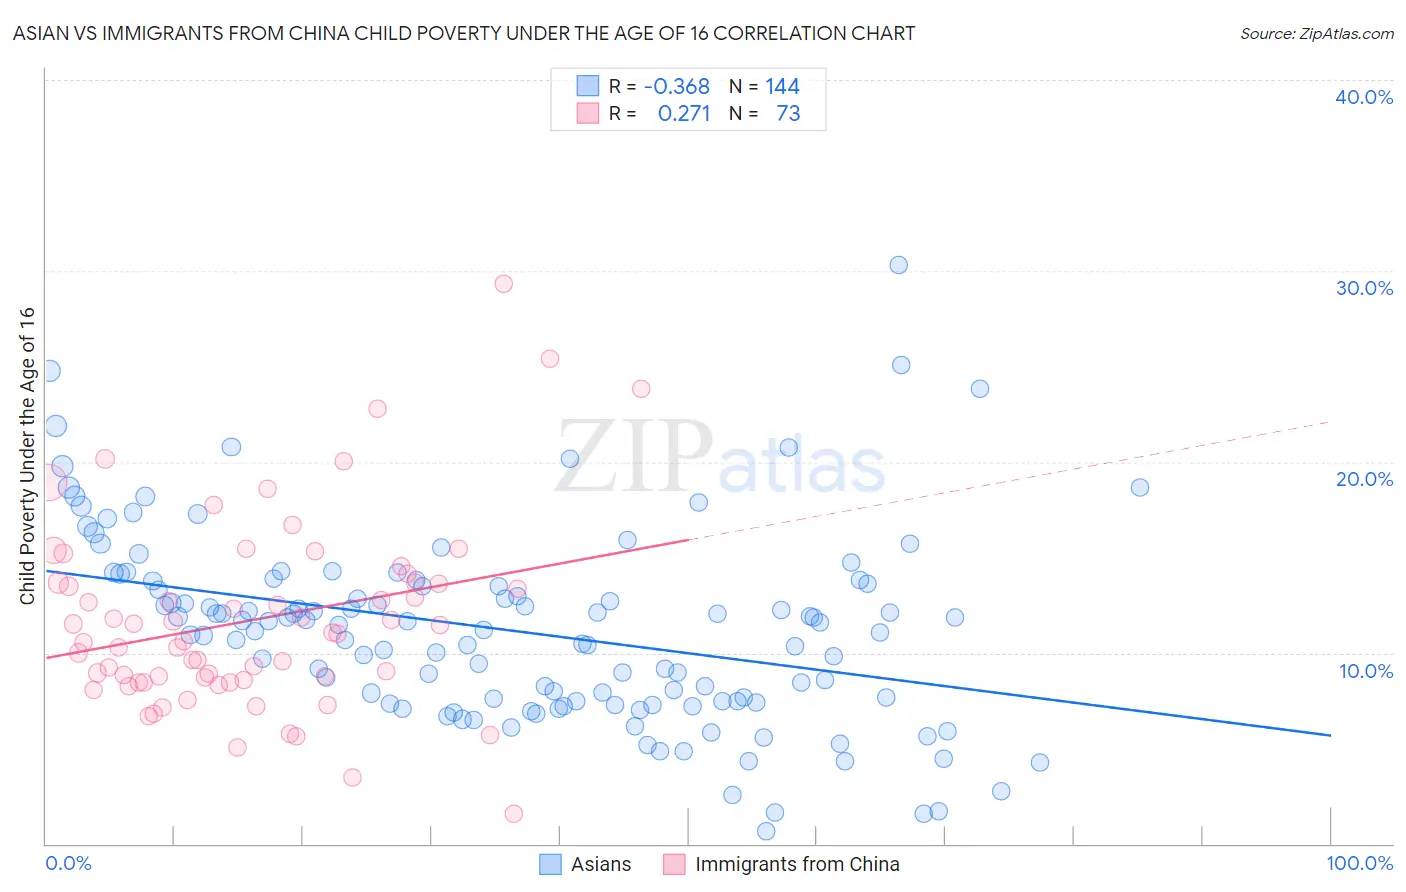 Asian vs Immigrants from China Child Poverty Under the Age of 16